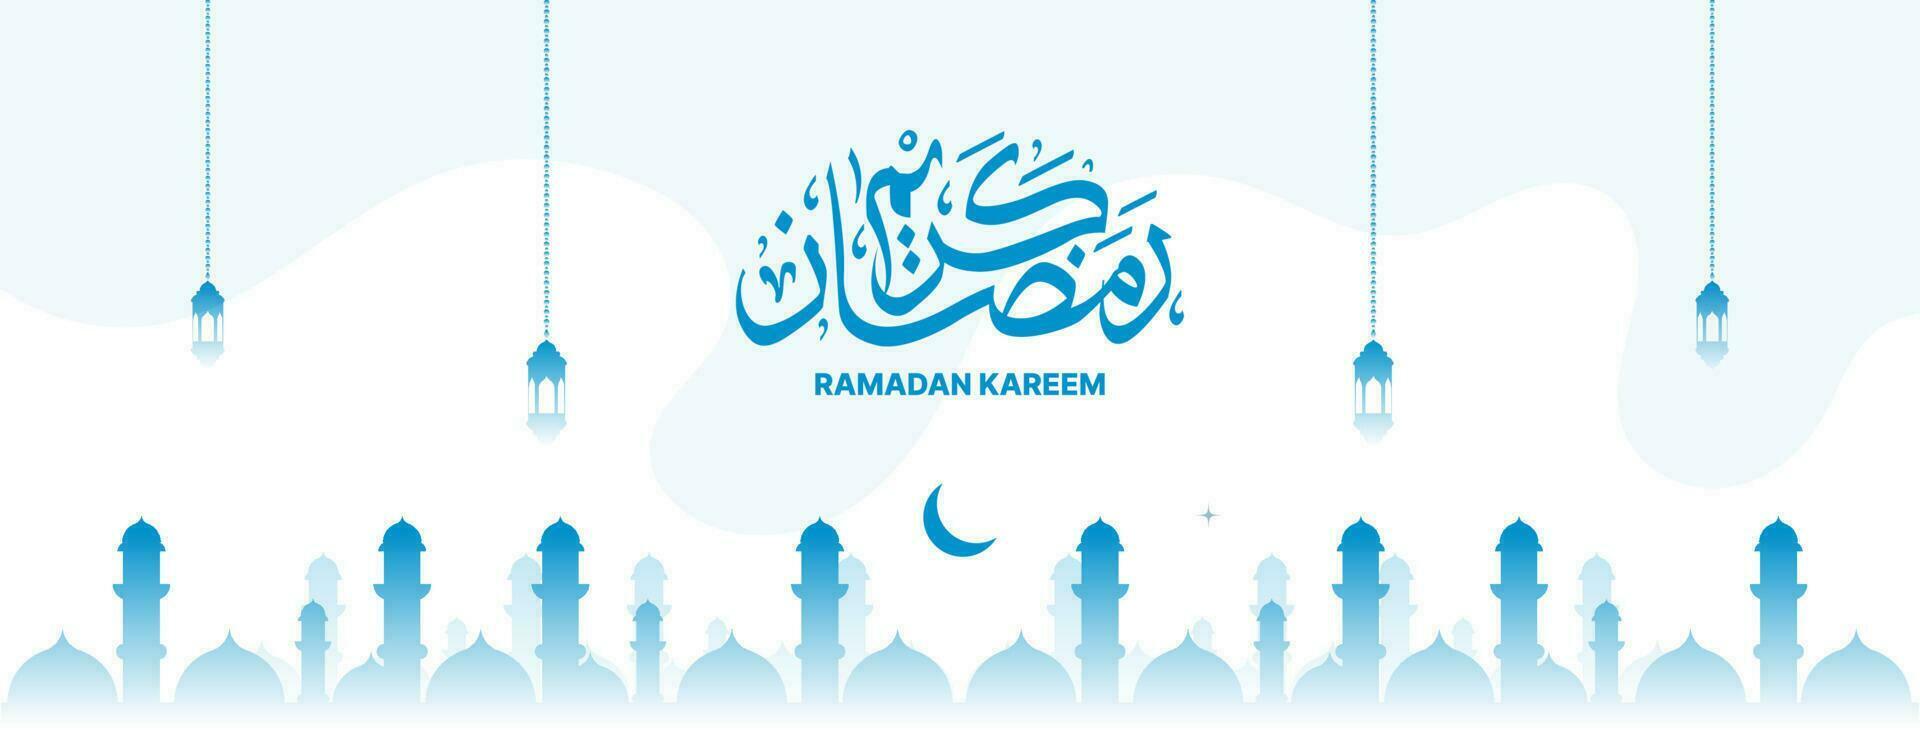 Ramadan Kareem banner design with arabic calligraphy in blue color with islamic mosque and lantern vector illustration